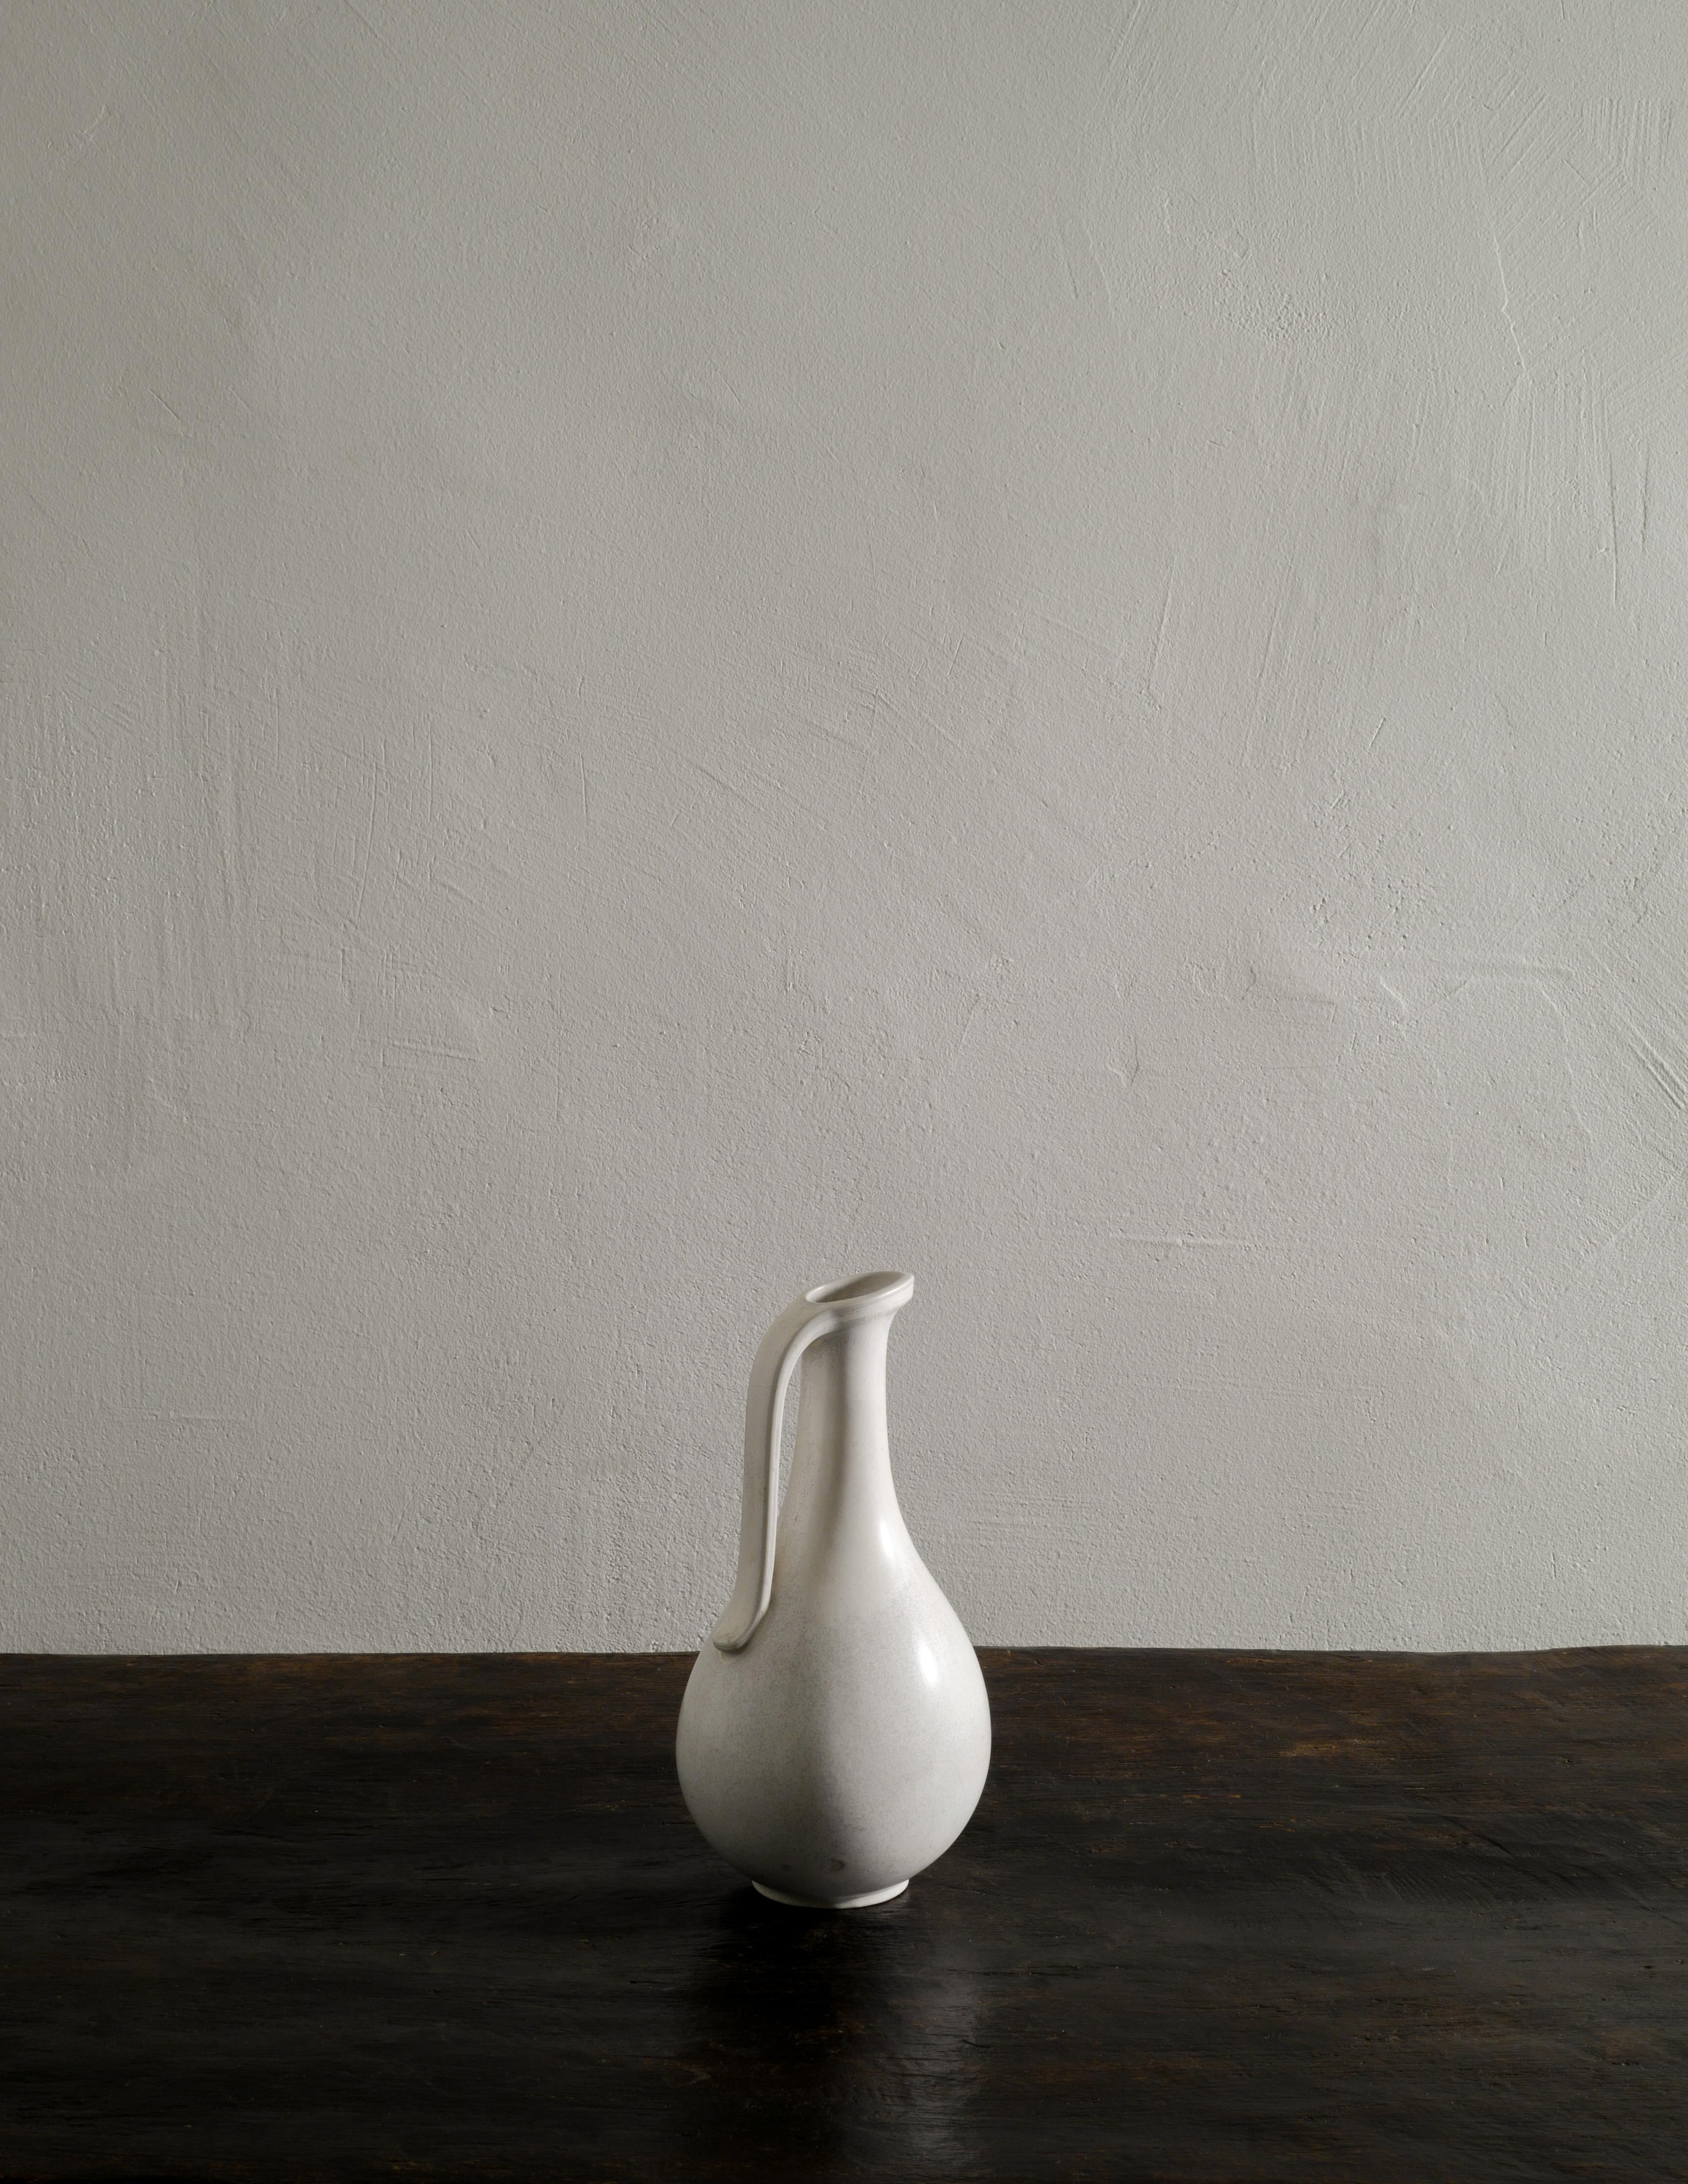 Rare white ceramic / stoneware mid-century pitcher jar by Gunnar Nylund for Rörstrand Sweden produced in the 1950s. In good vintage and original condition with small signs from age and use. A few 